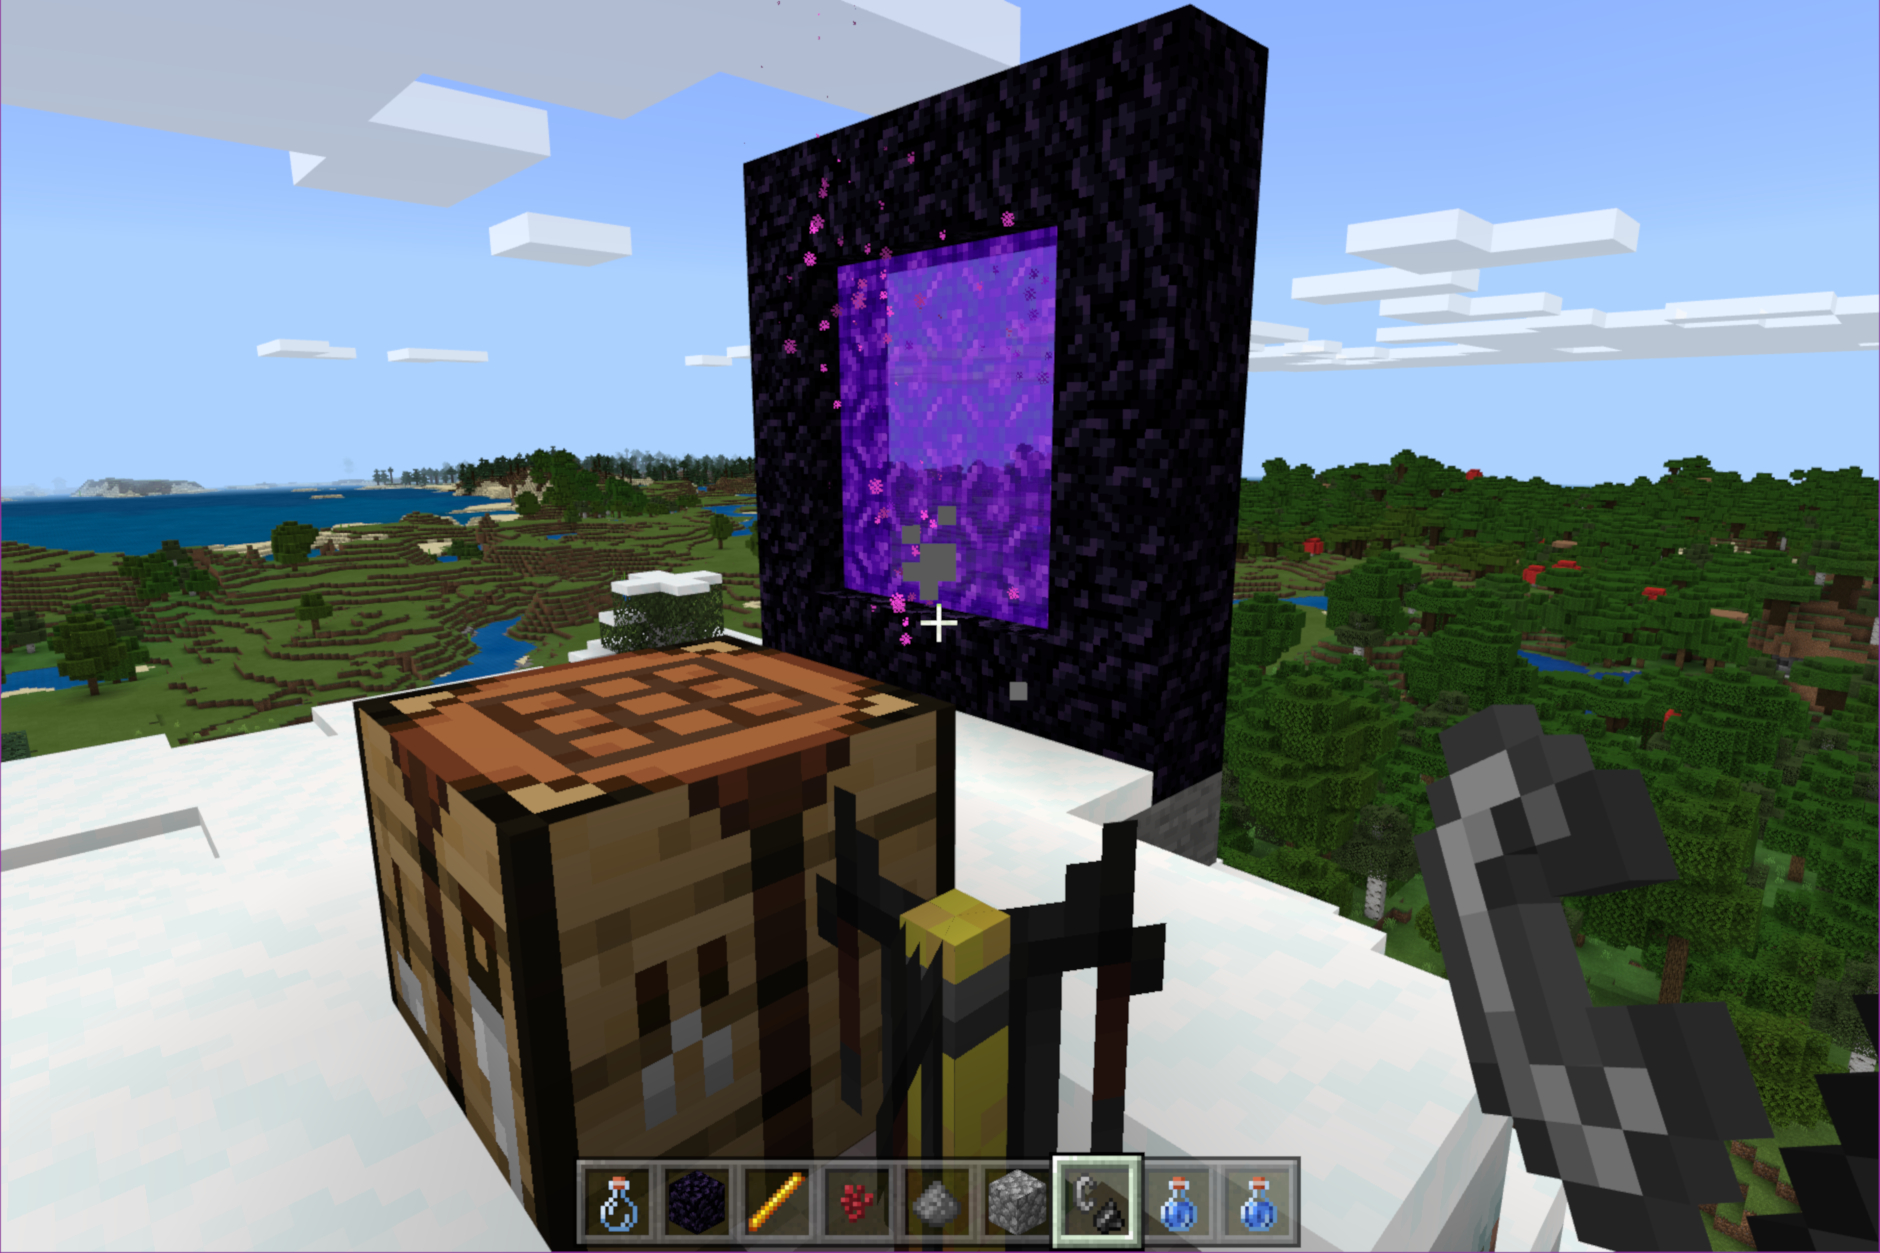 Minecraft Guide: Where to Find the Ender Dragon